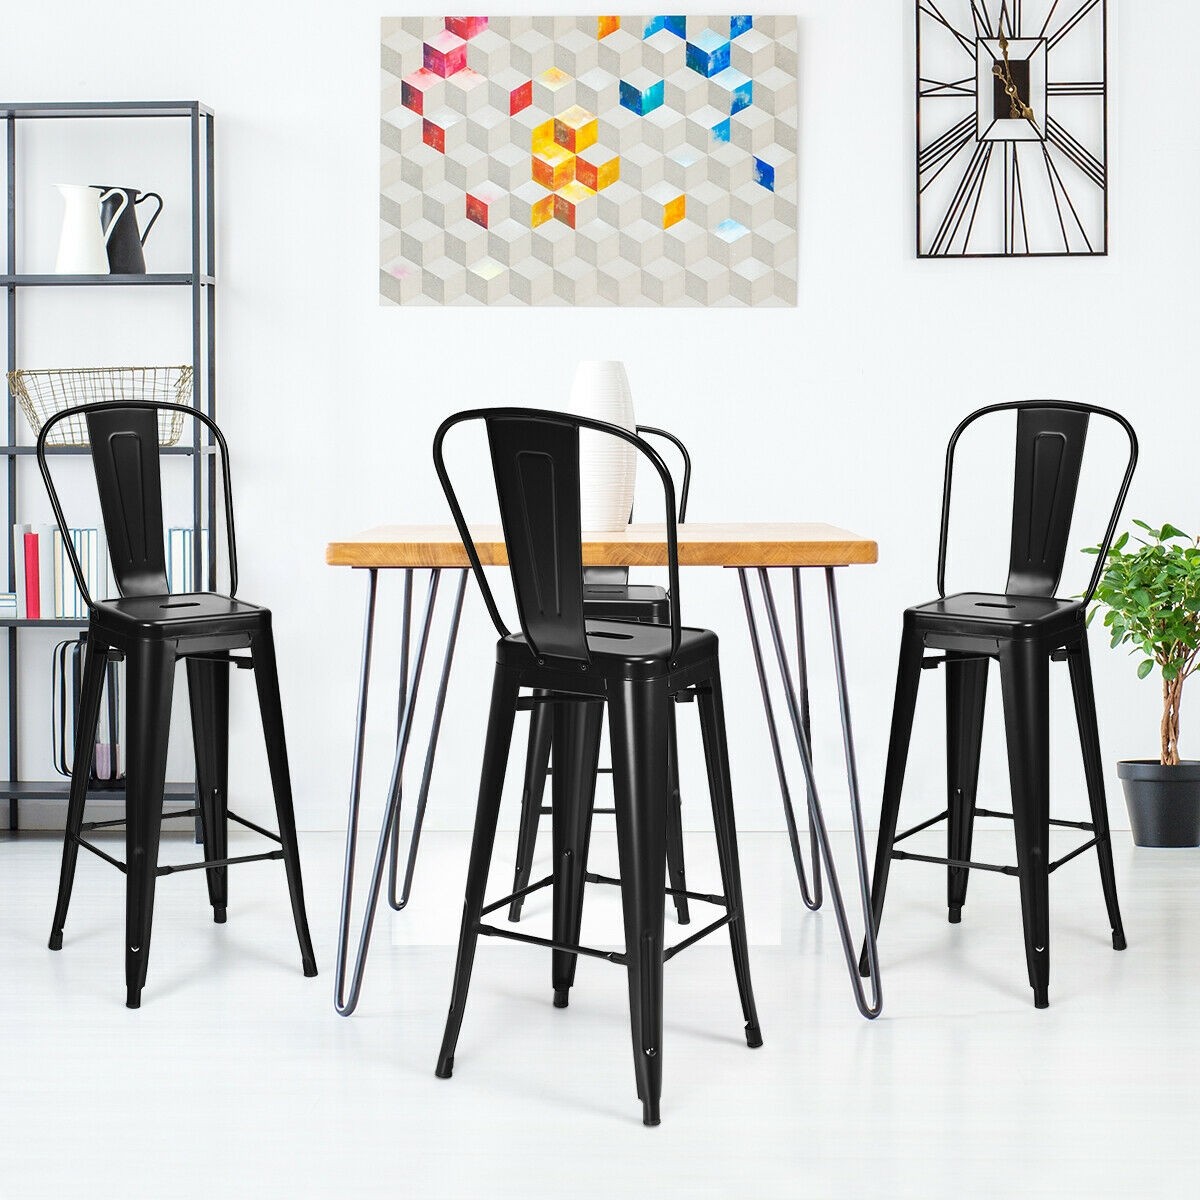 30 In. Height Set Of 4 High Back Metal Industrial Bar Stools